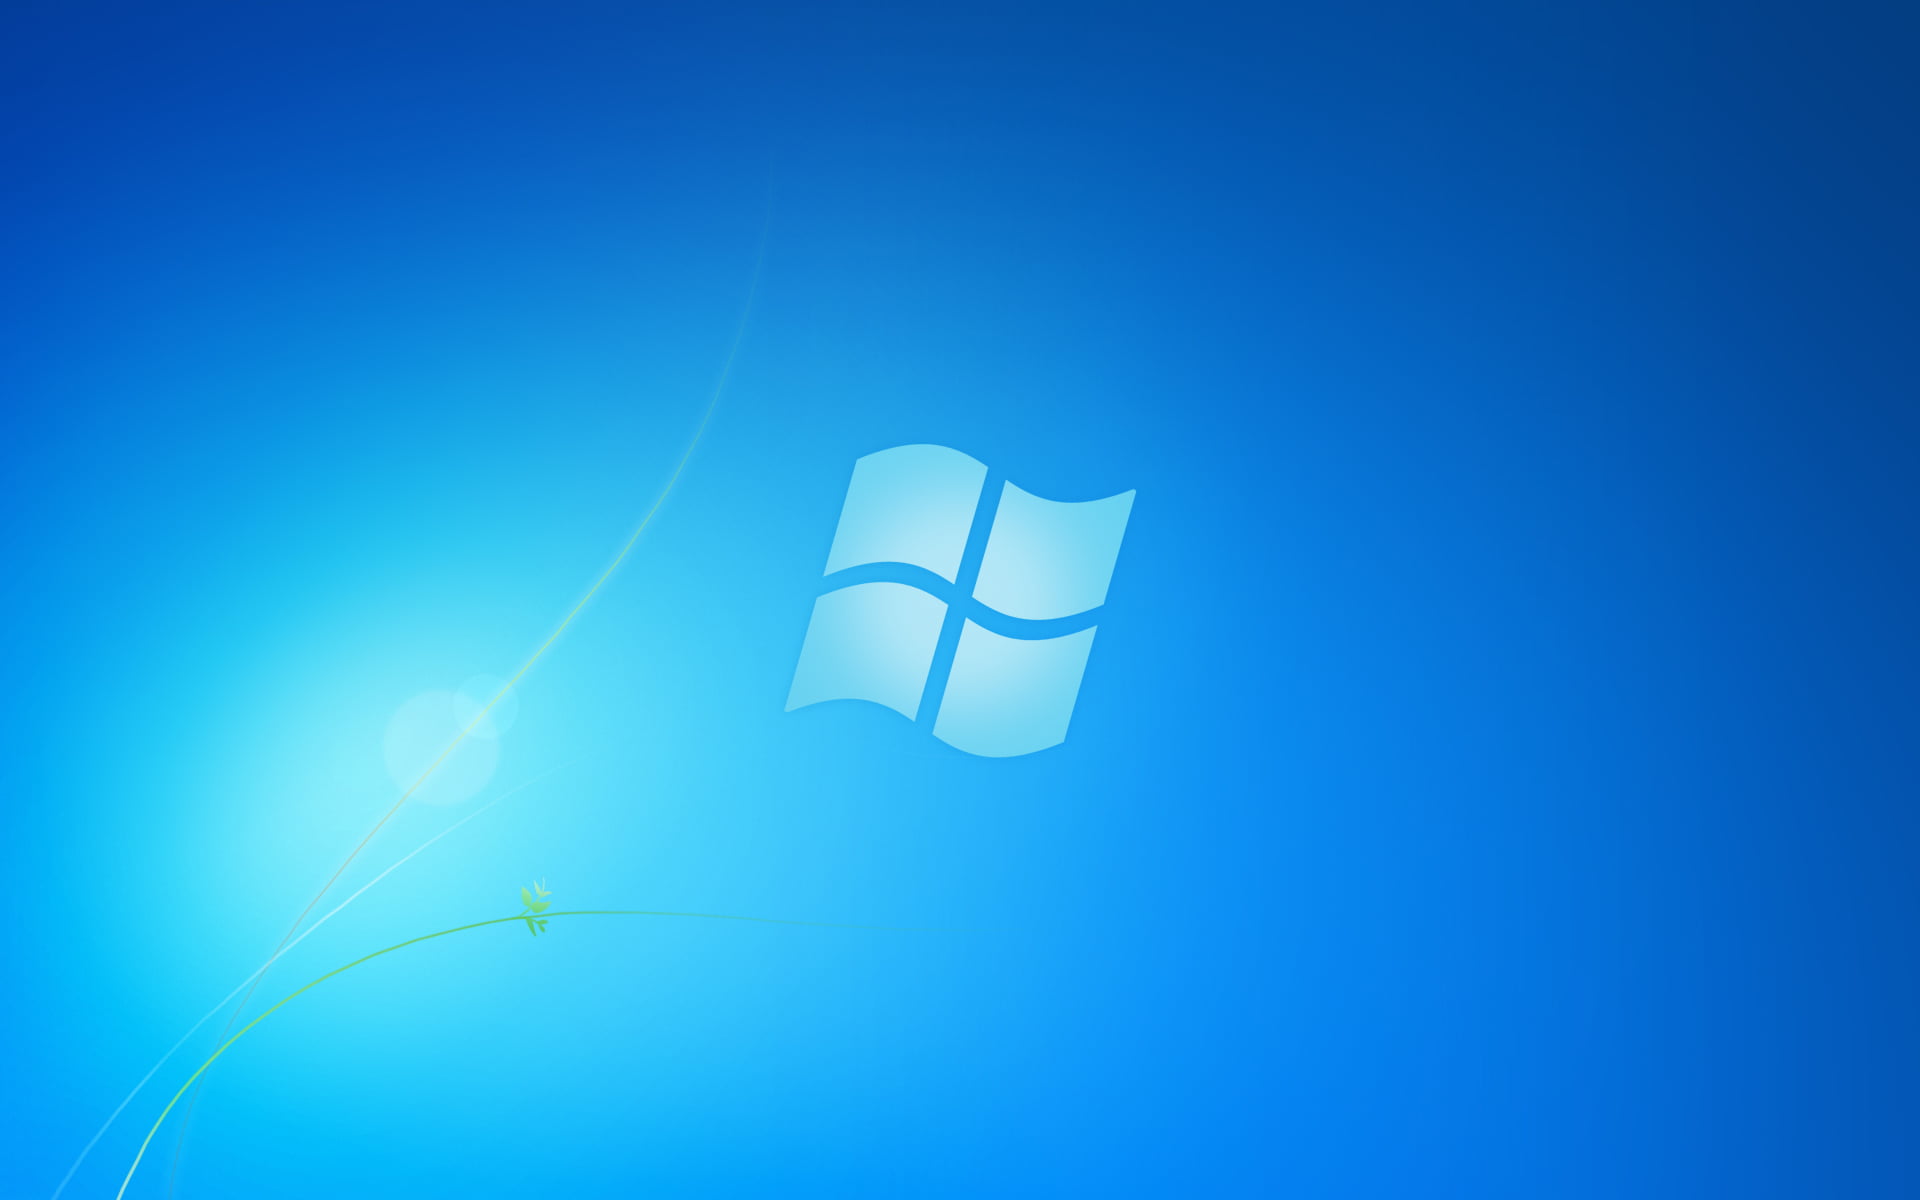 How To Change Windows 7 Starter Wallpaper Without Download